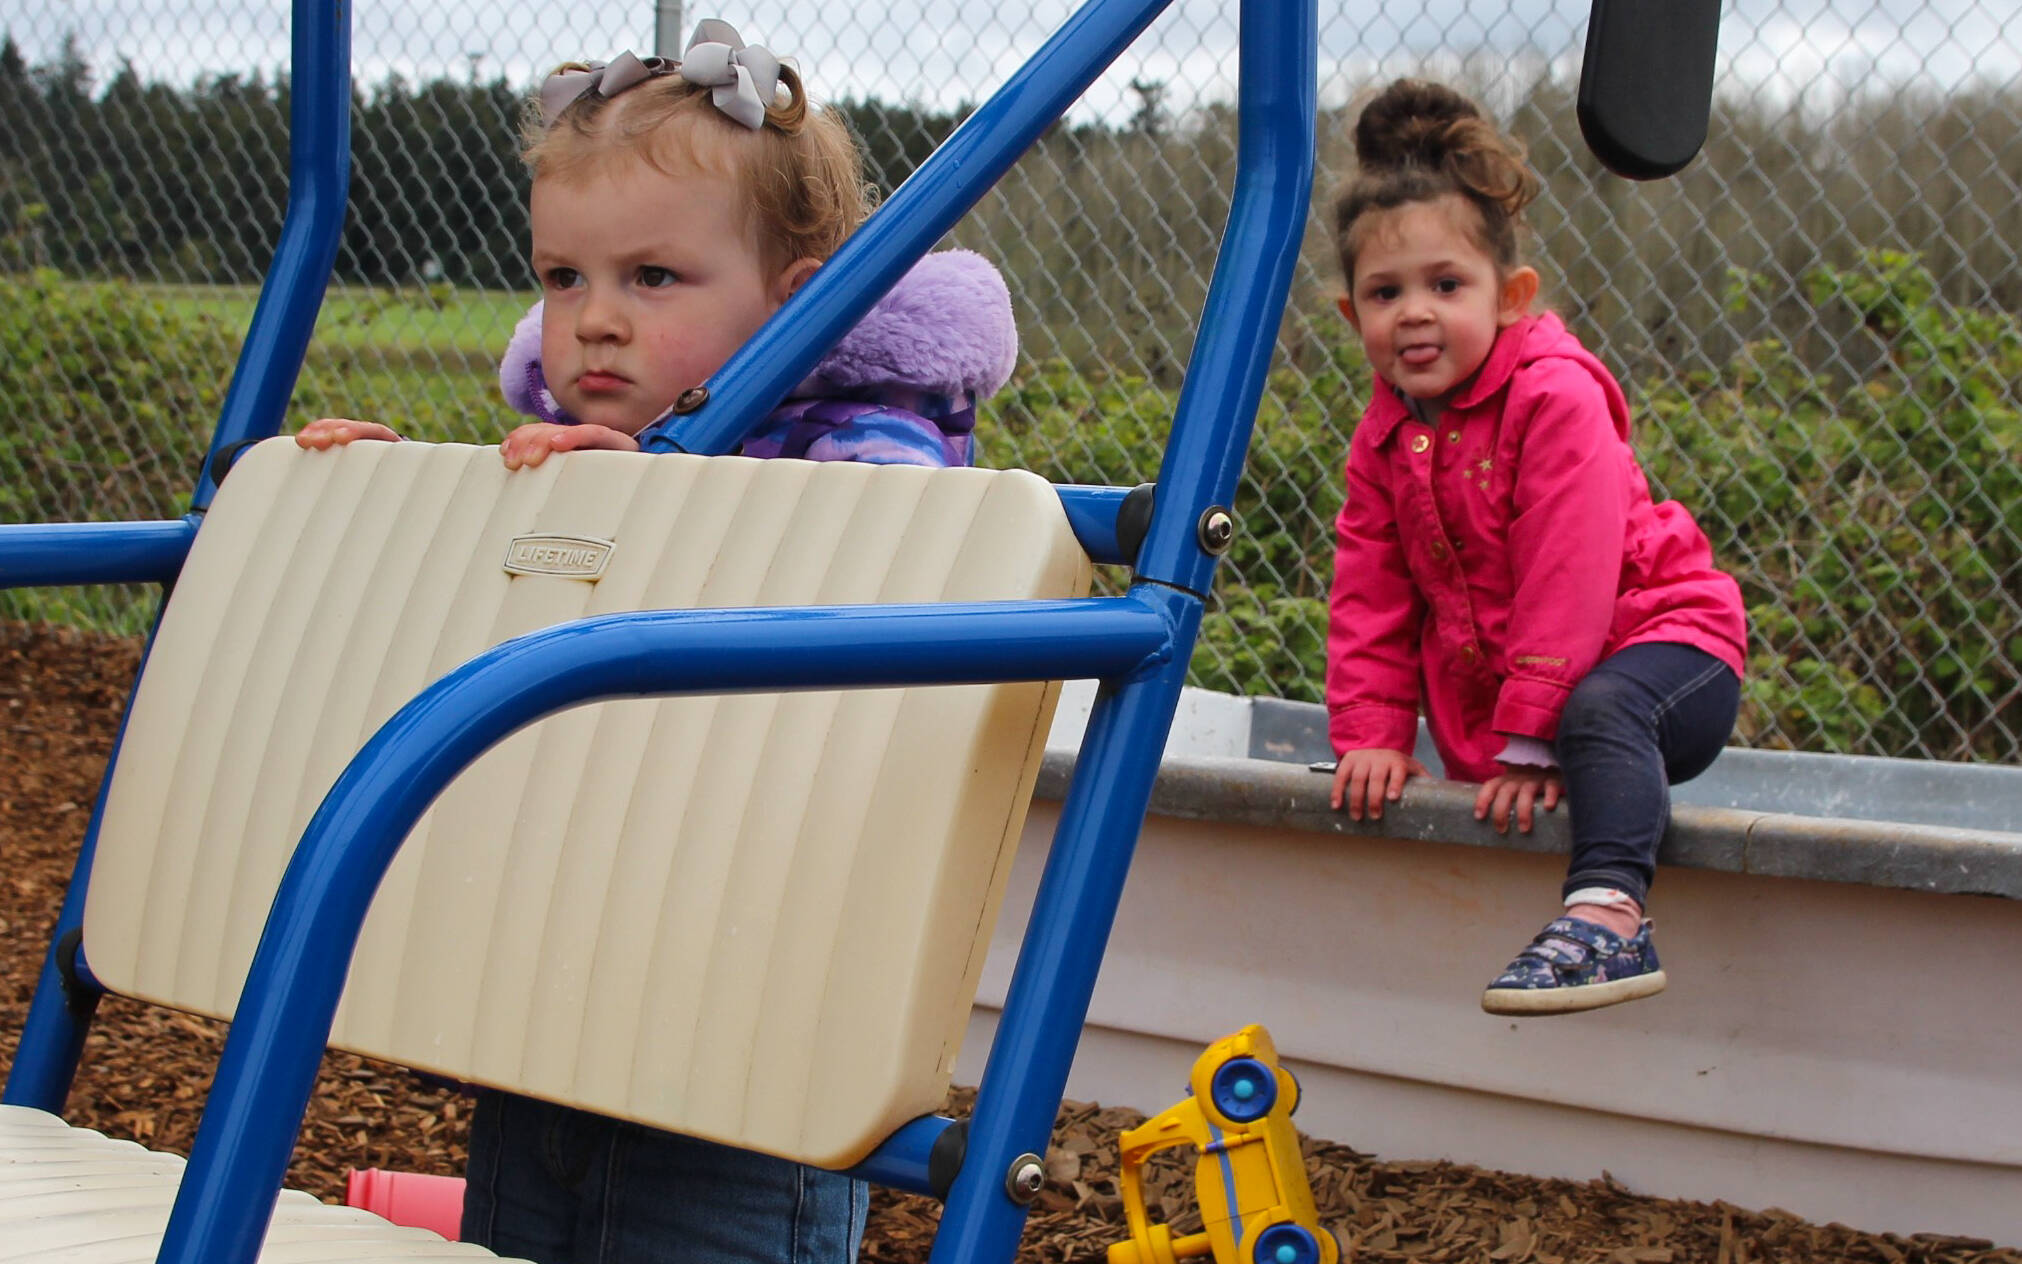 Olivia Pursell and Talia Skaugrug play at Ebey Academy’s playground. (Photo by Luisa Loi)